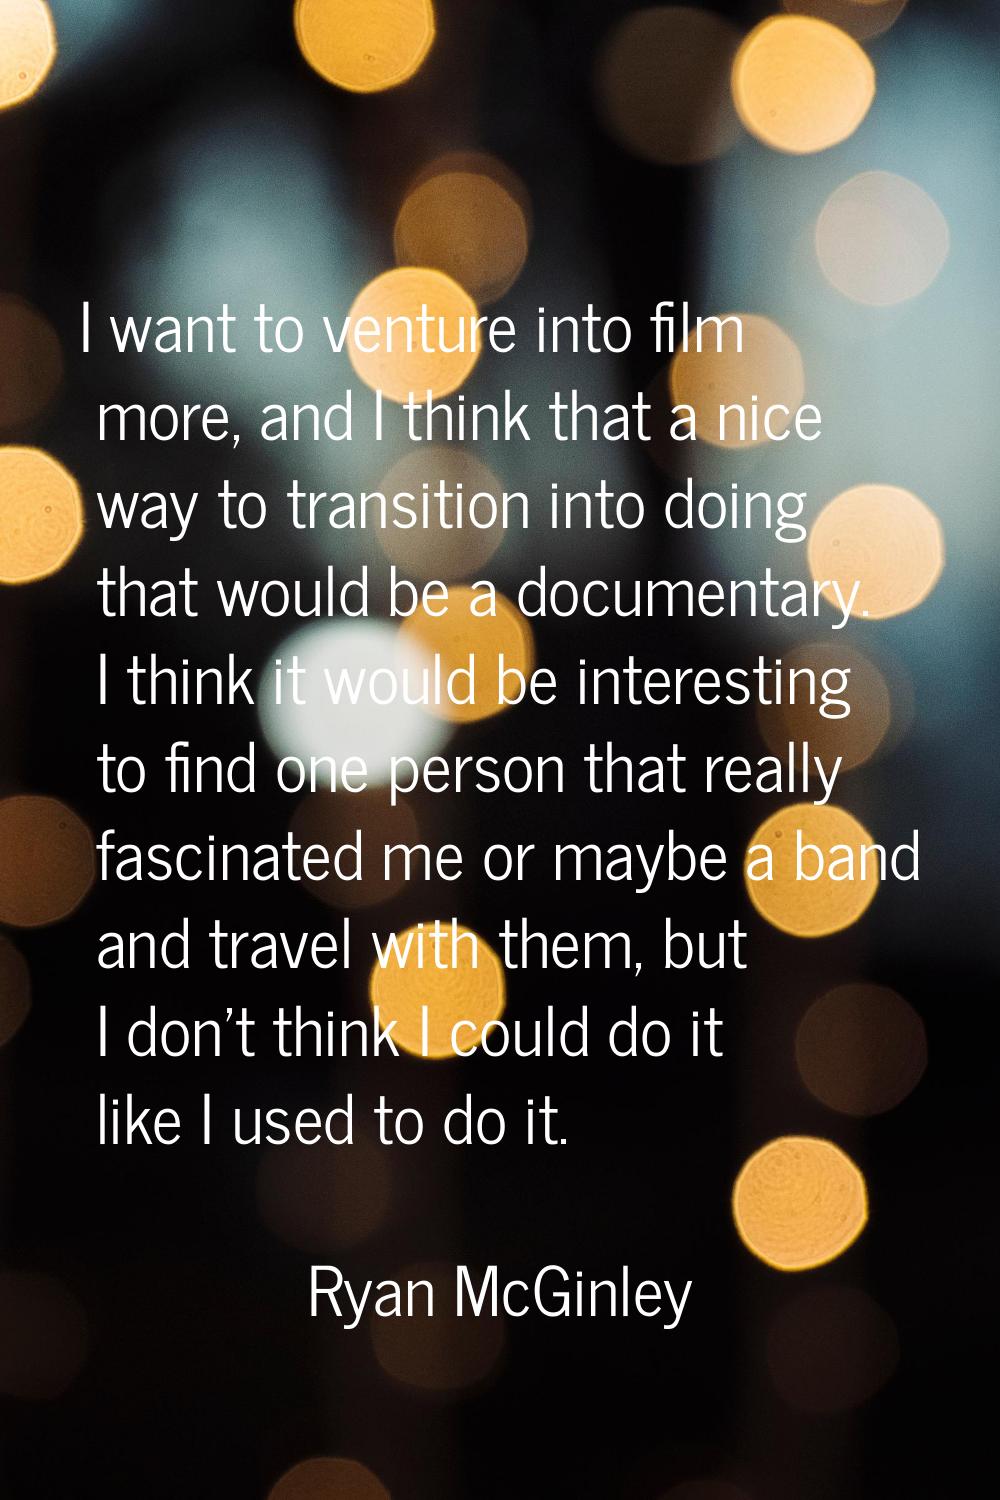 I want to venture into film more, and I think that a nice way to transition into doing that would b